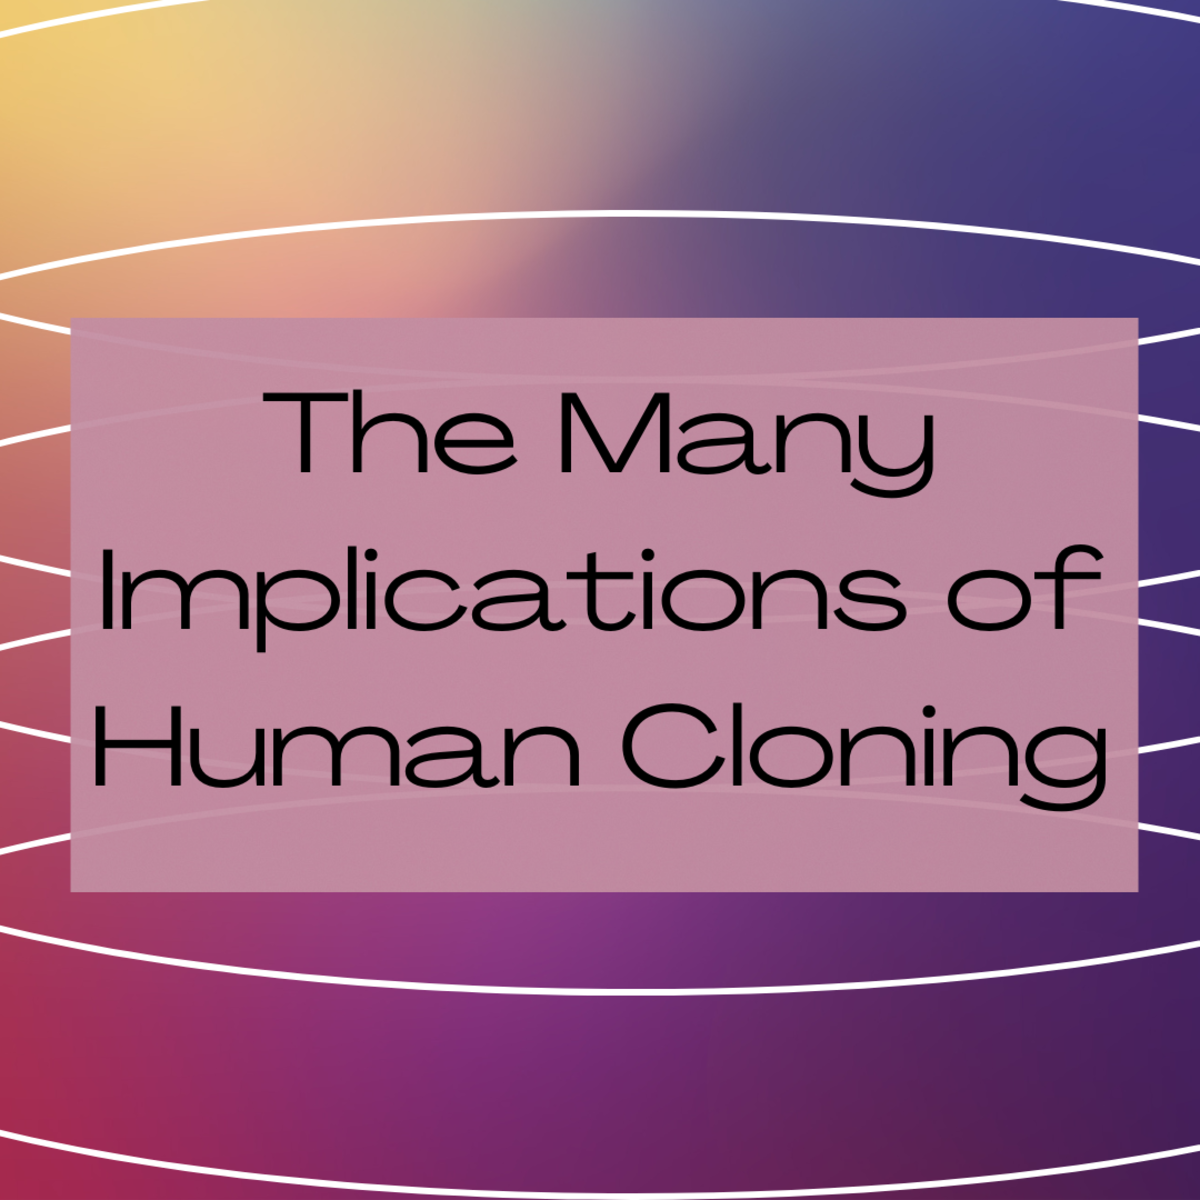 What are the implications of human cloning? 